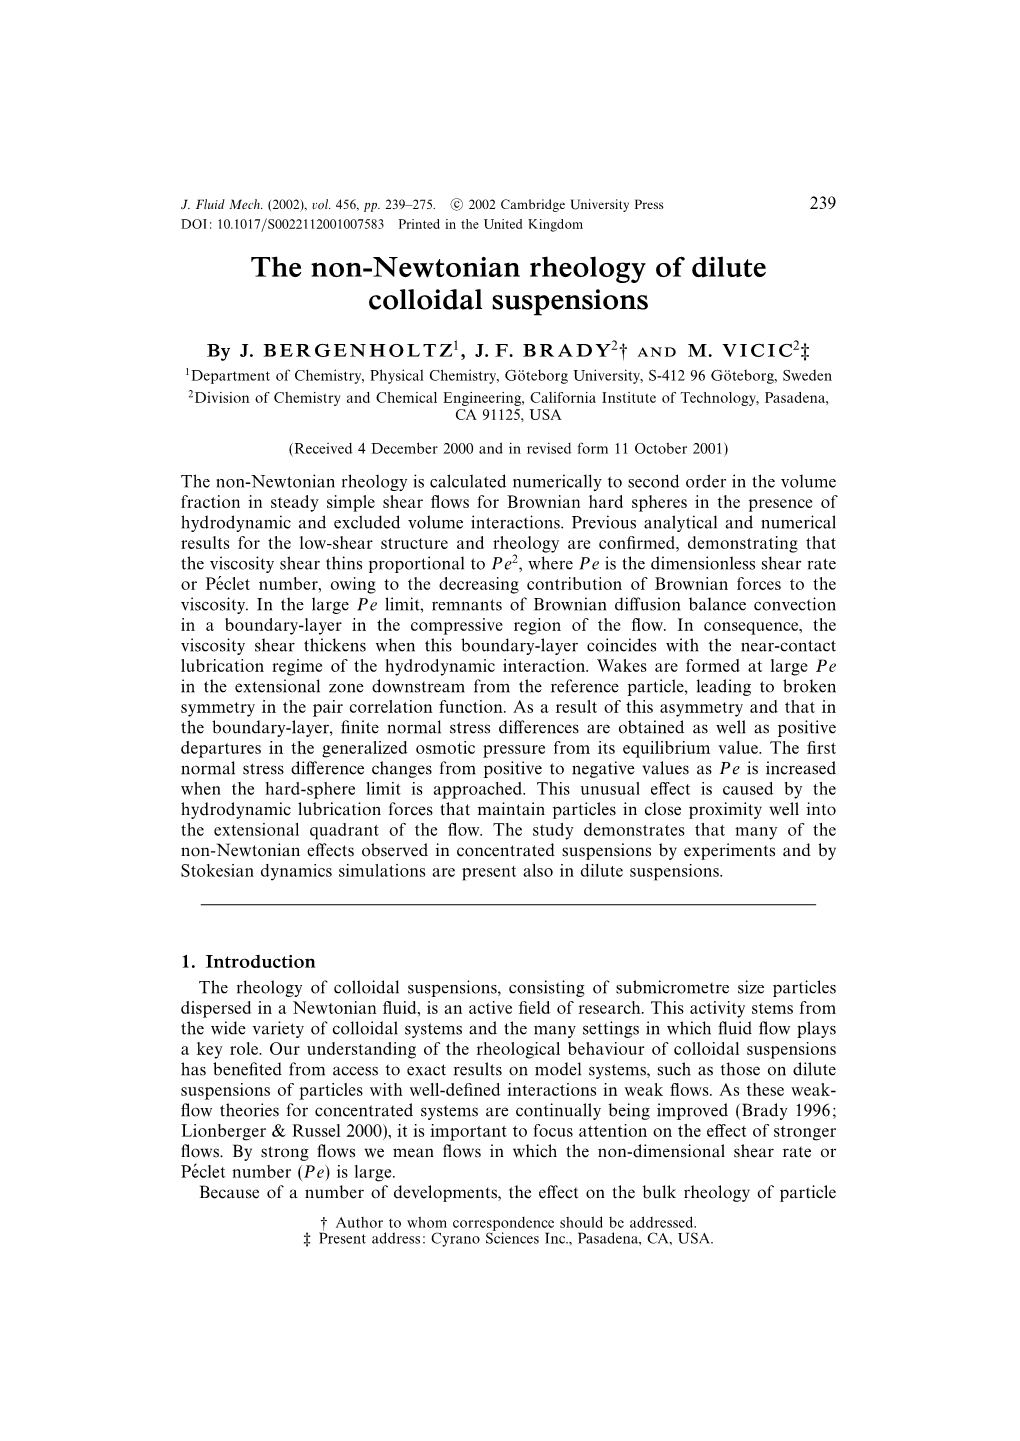 The Non-Newtonian Rheology of Dilute Colloidal Suspensions